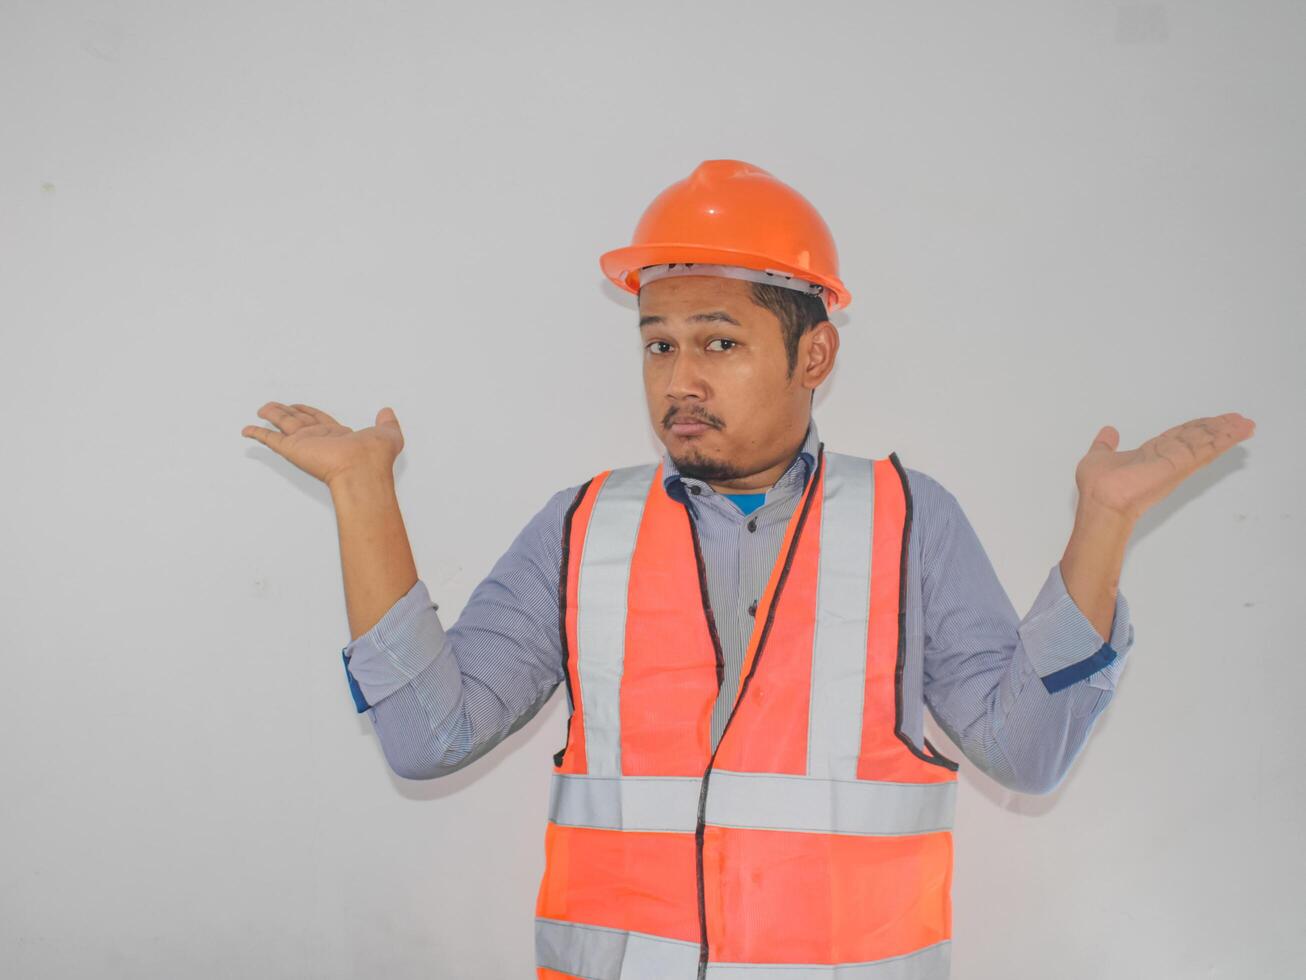 asian worker man wearing orange safety vest uniform and helmet clueless and confused expression with arms and hands raised. Doubt concept. photo